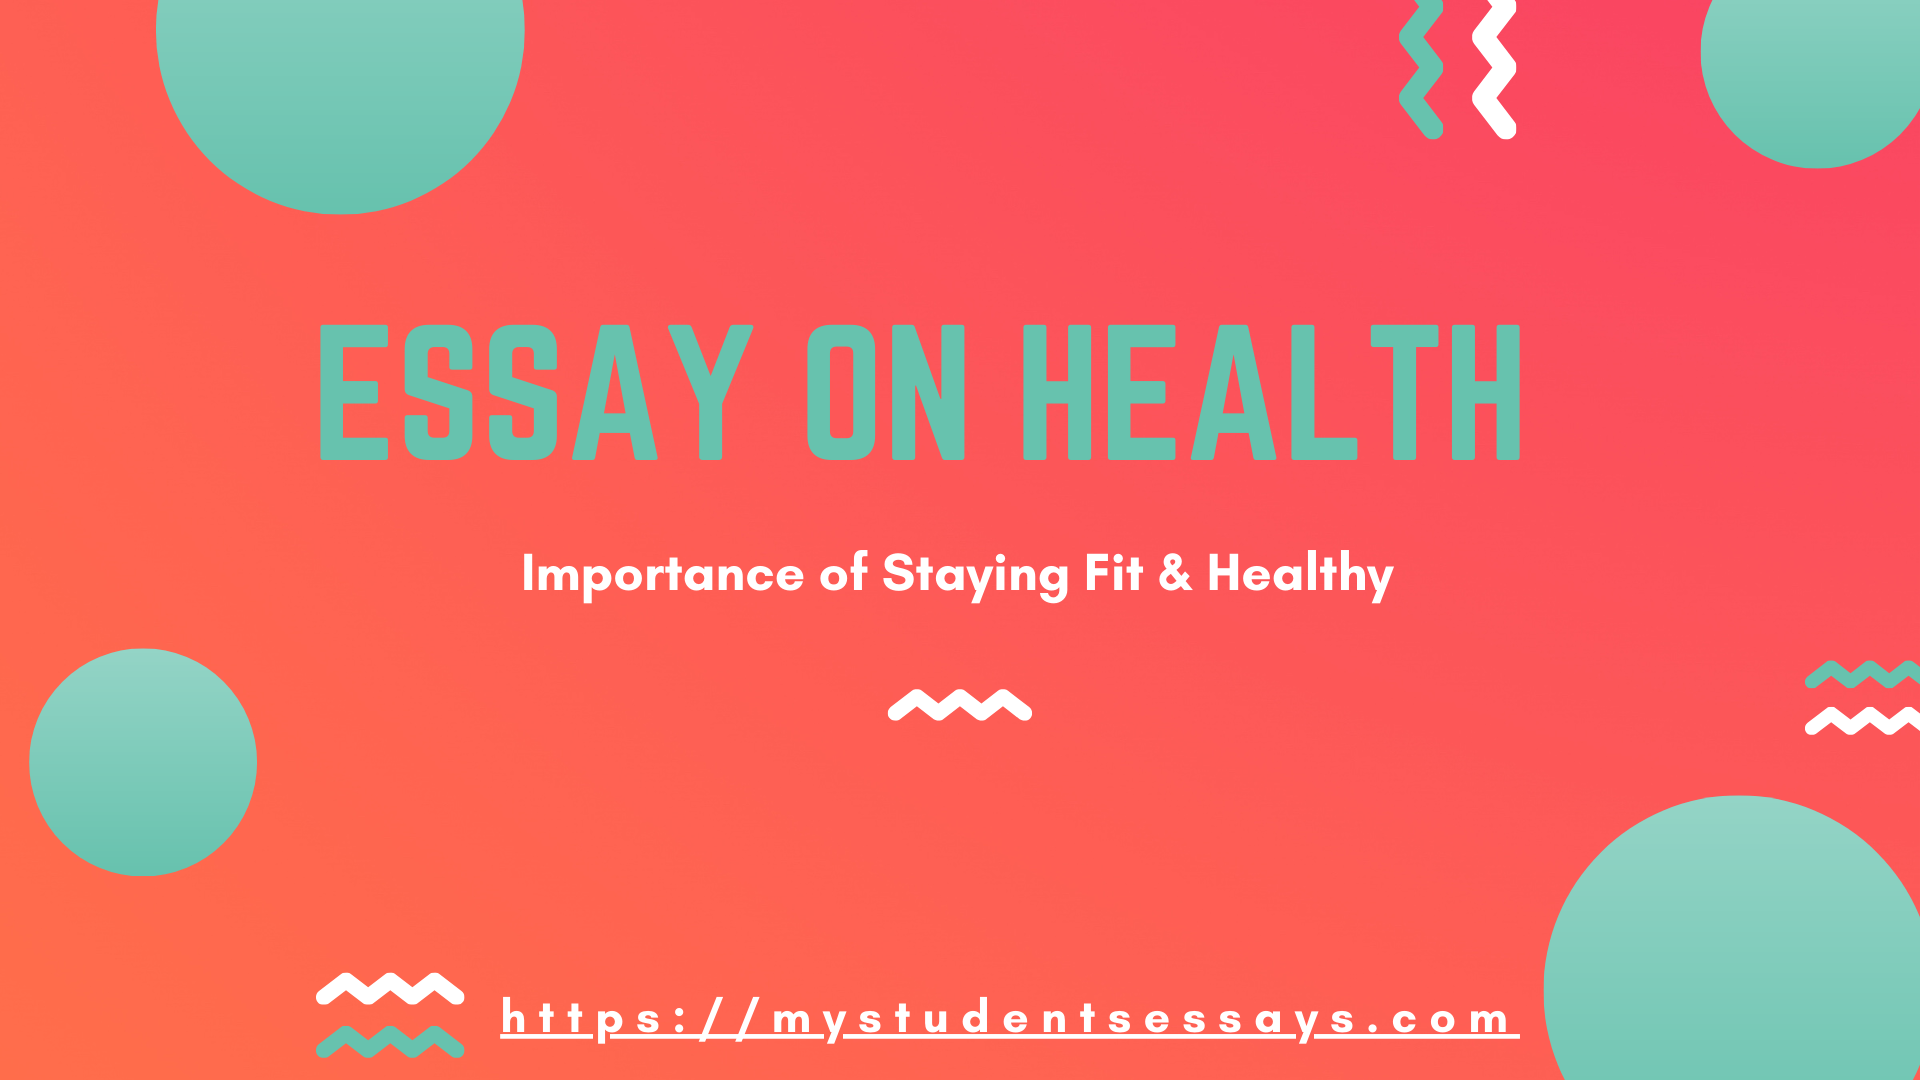 Essay On Health For Students